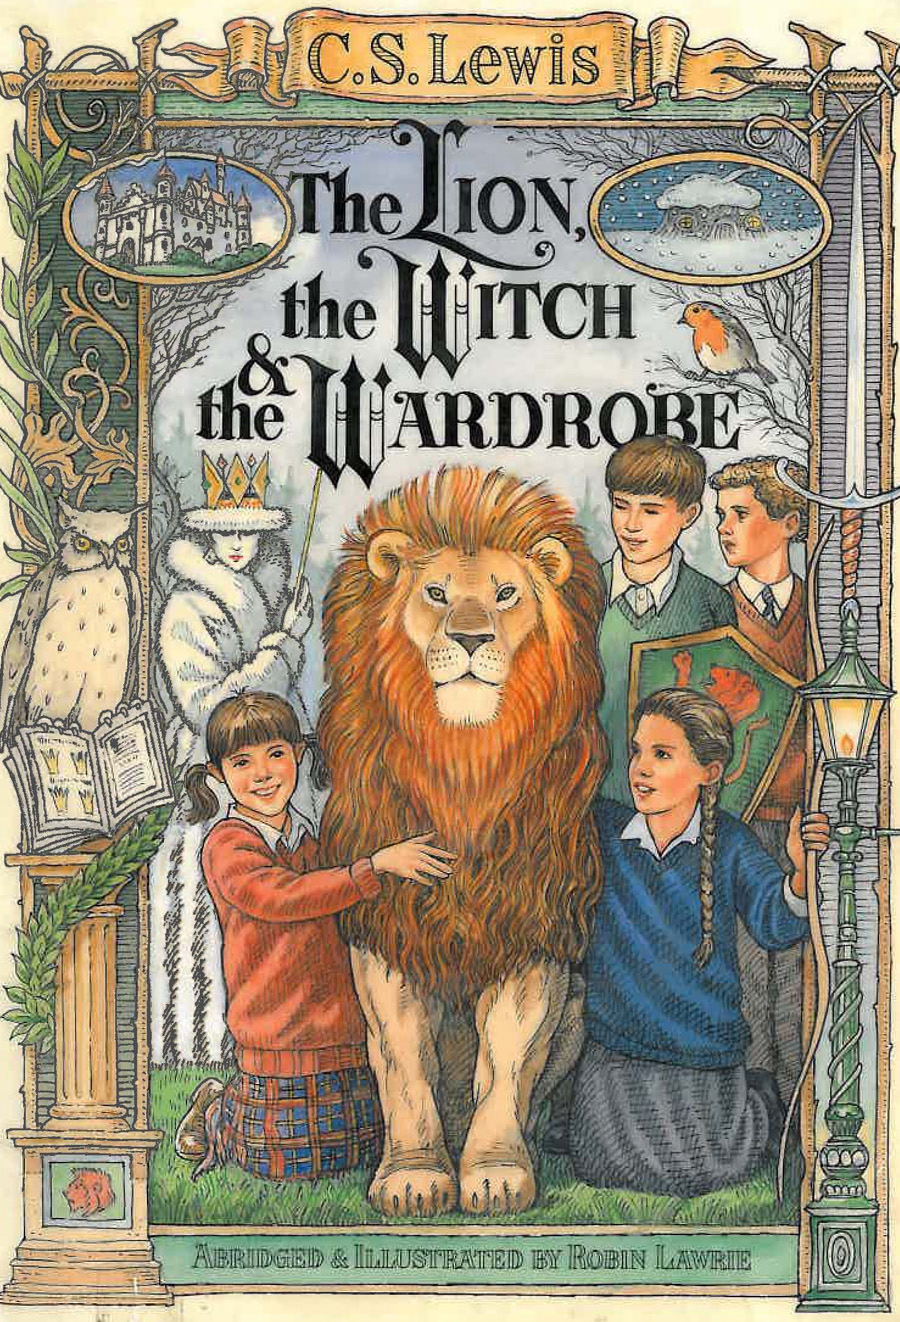 Should a Christian read the Chronicles of Narnia series or see the